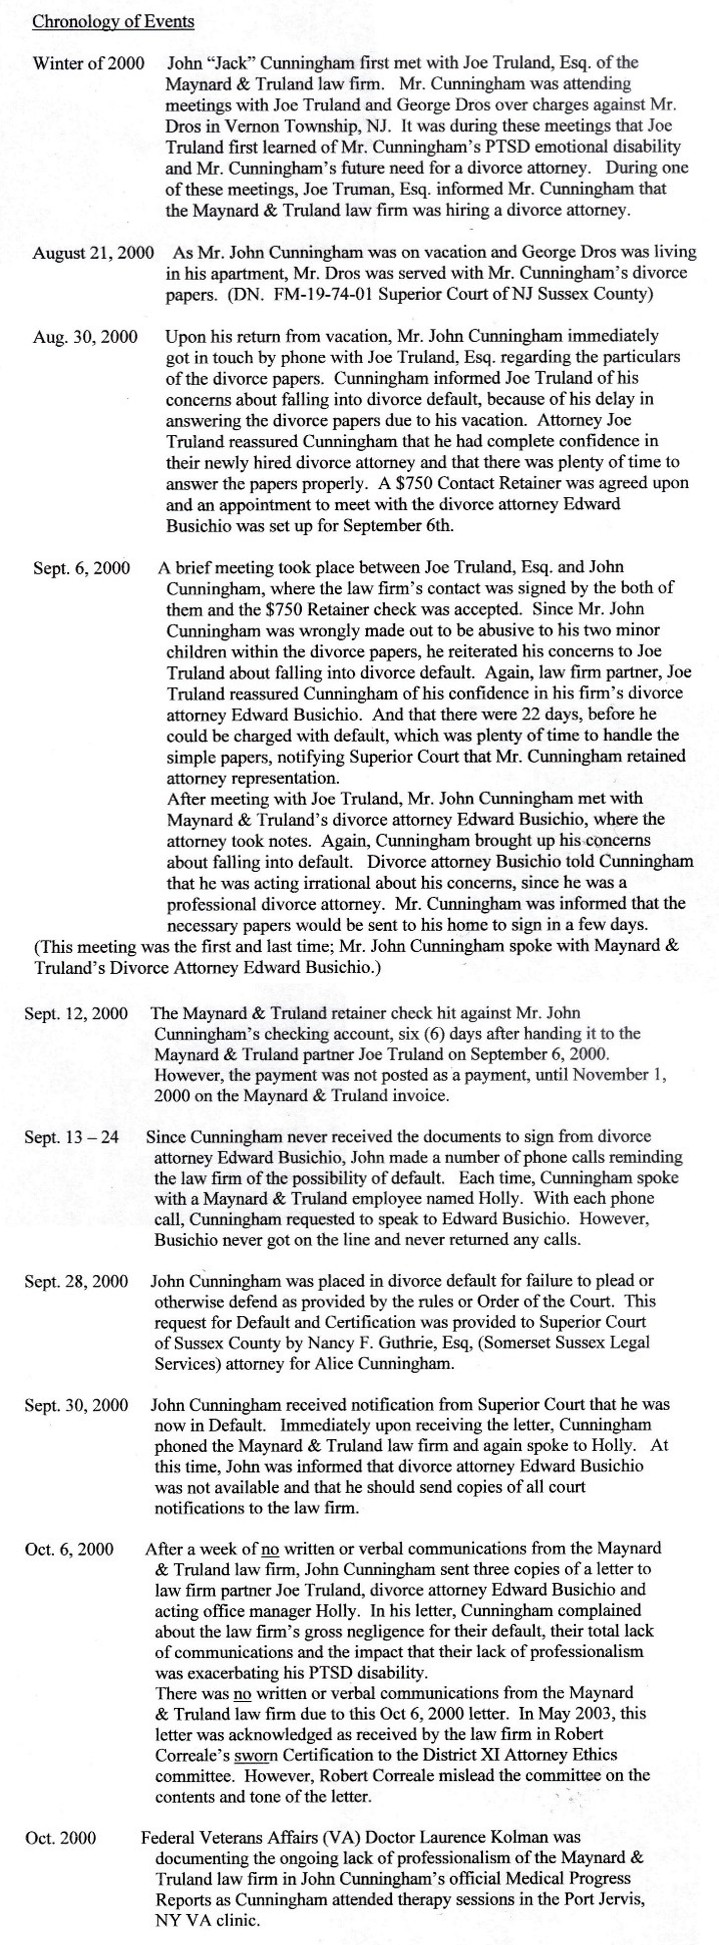 chronology_of_events_pages_1_2_part_1.jpg